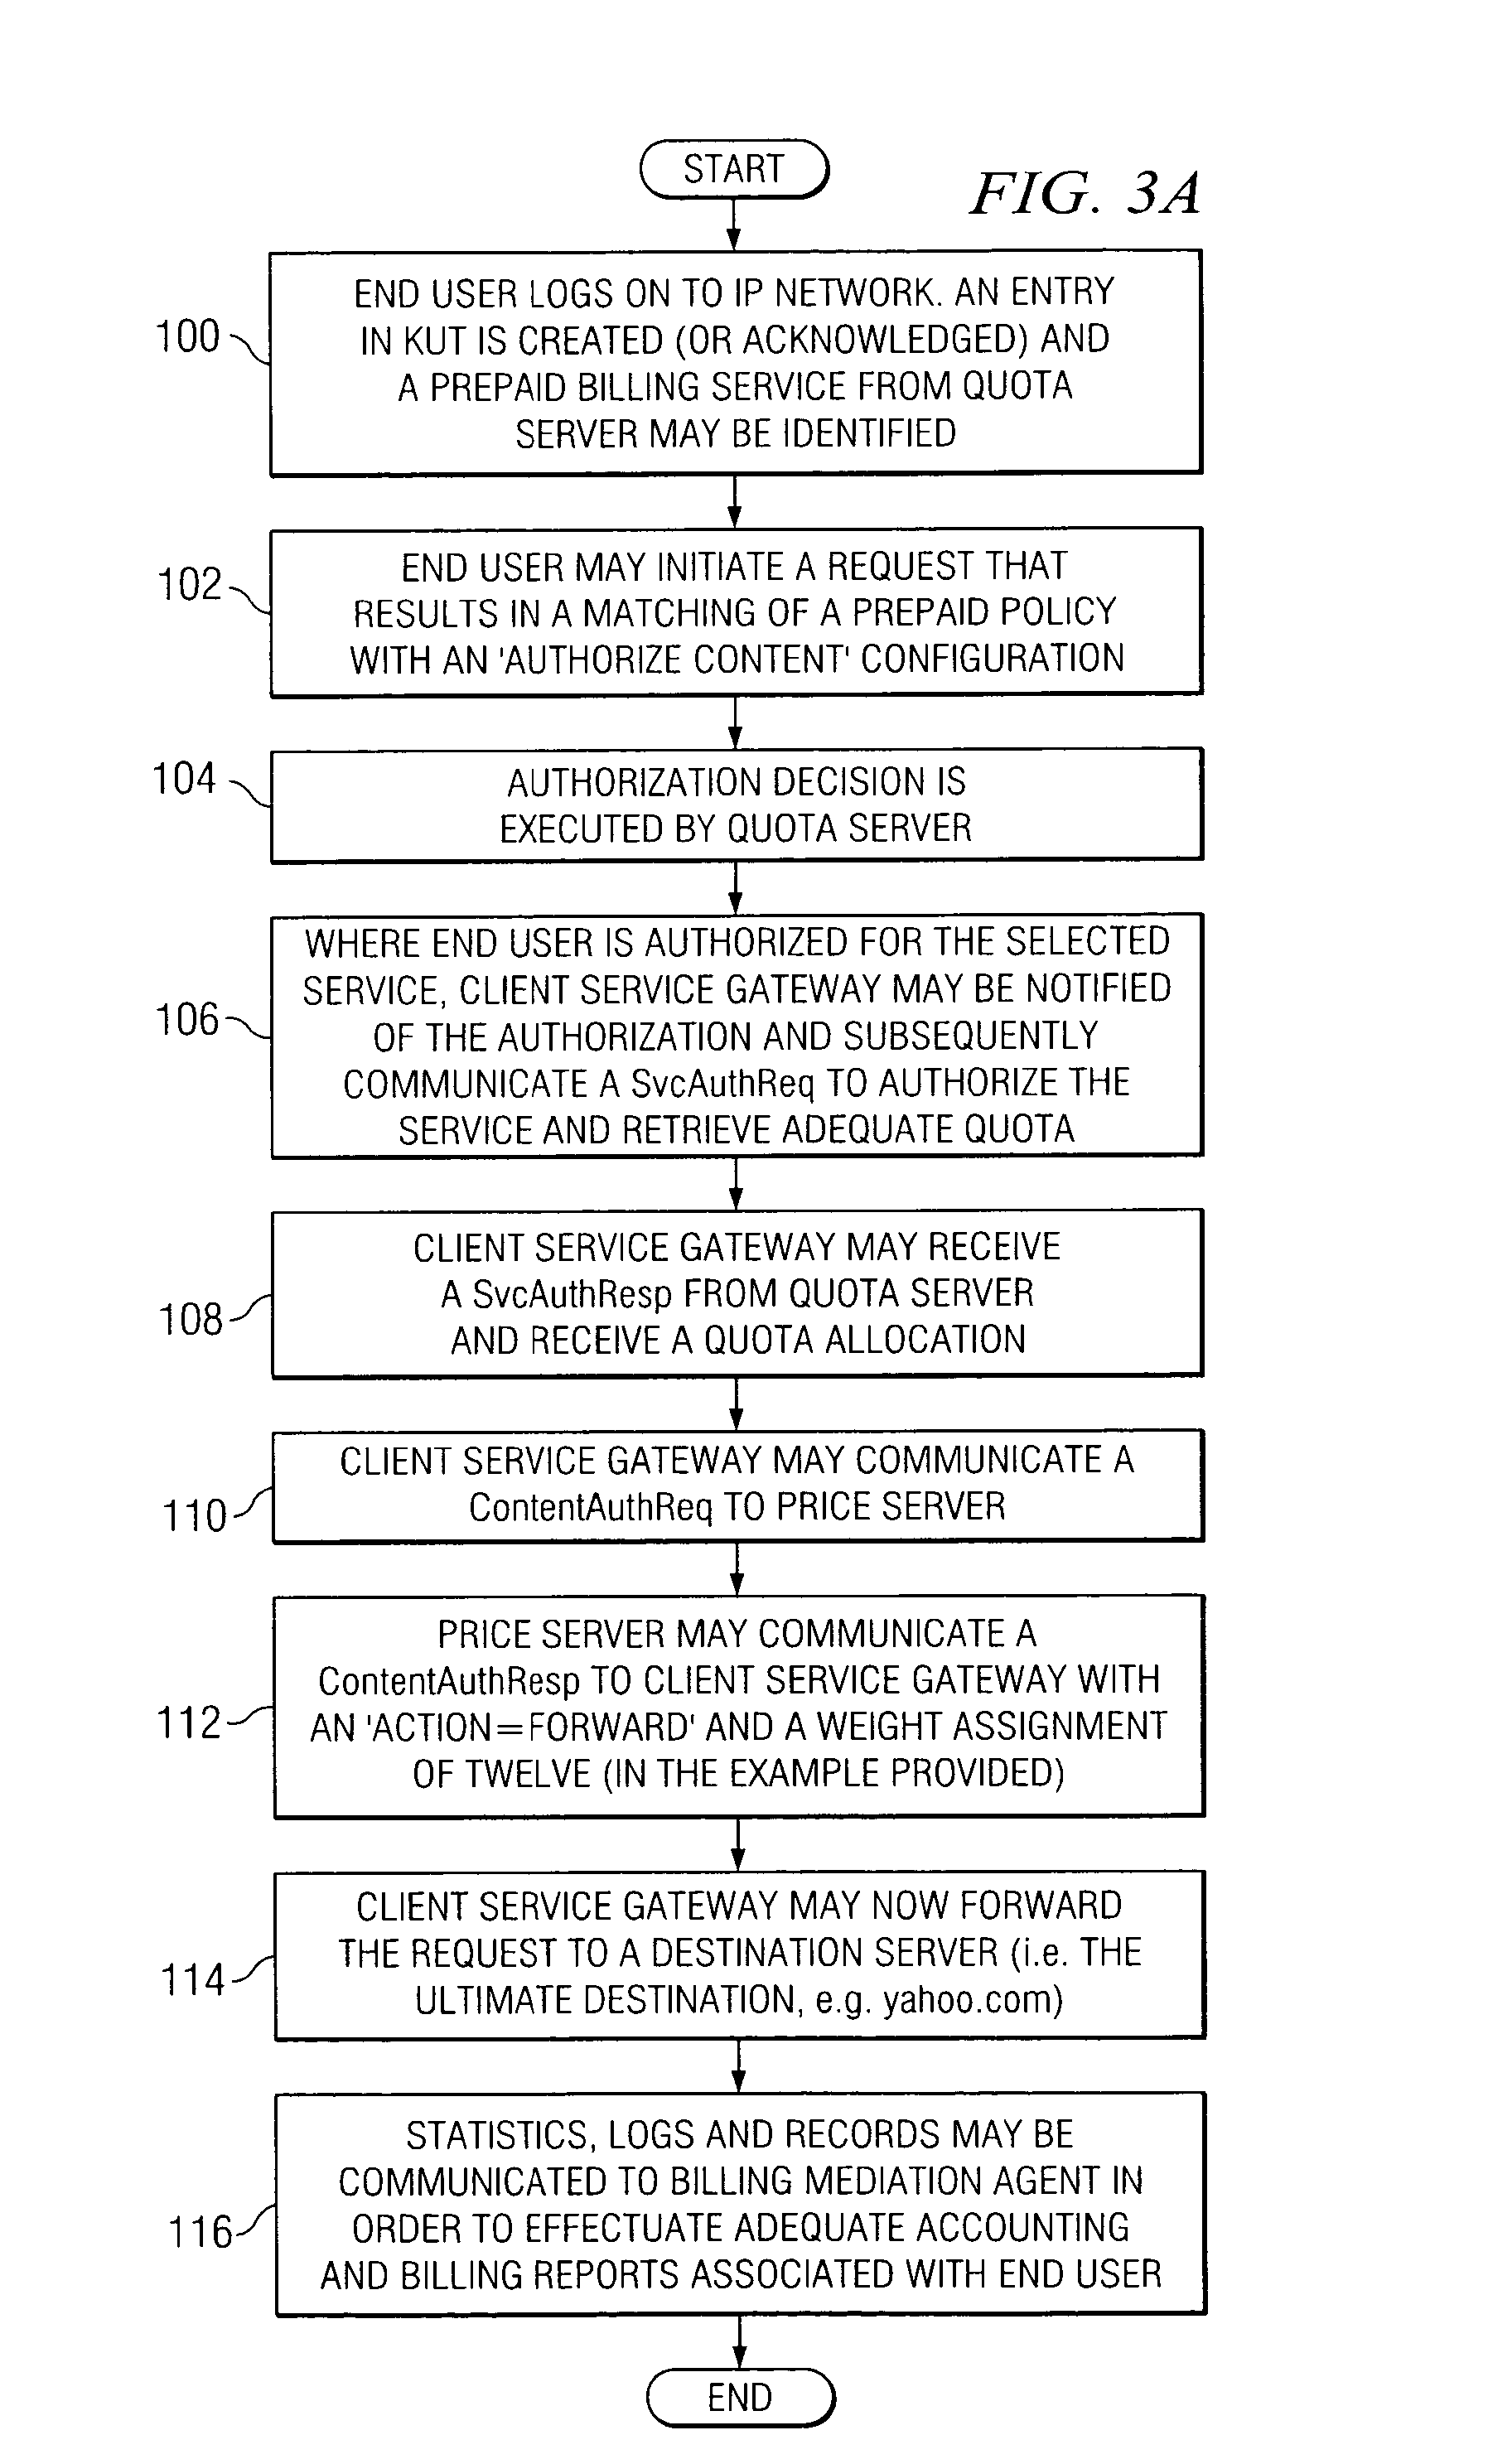 System and method for managing access for an end user in a network environment